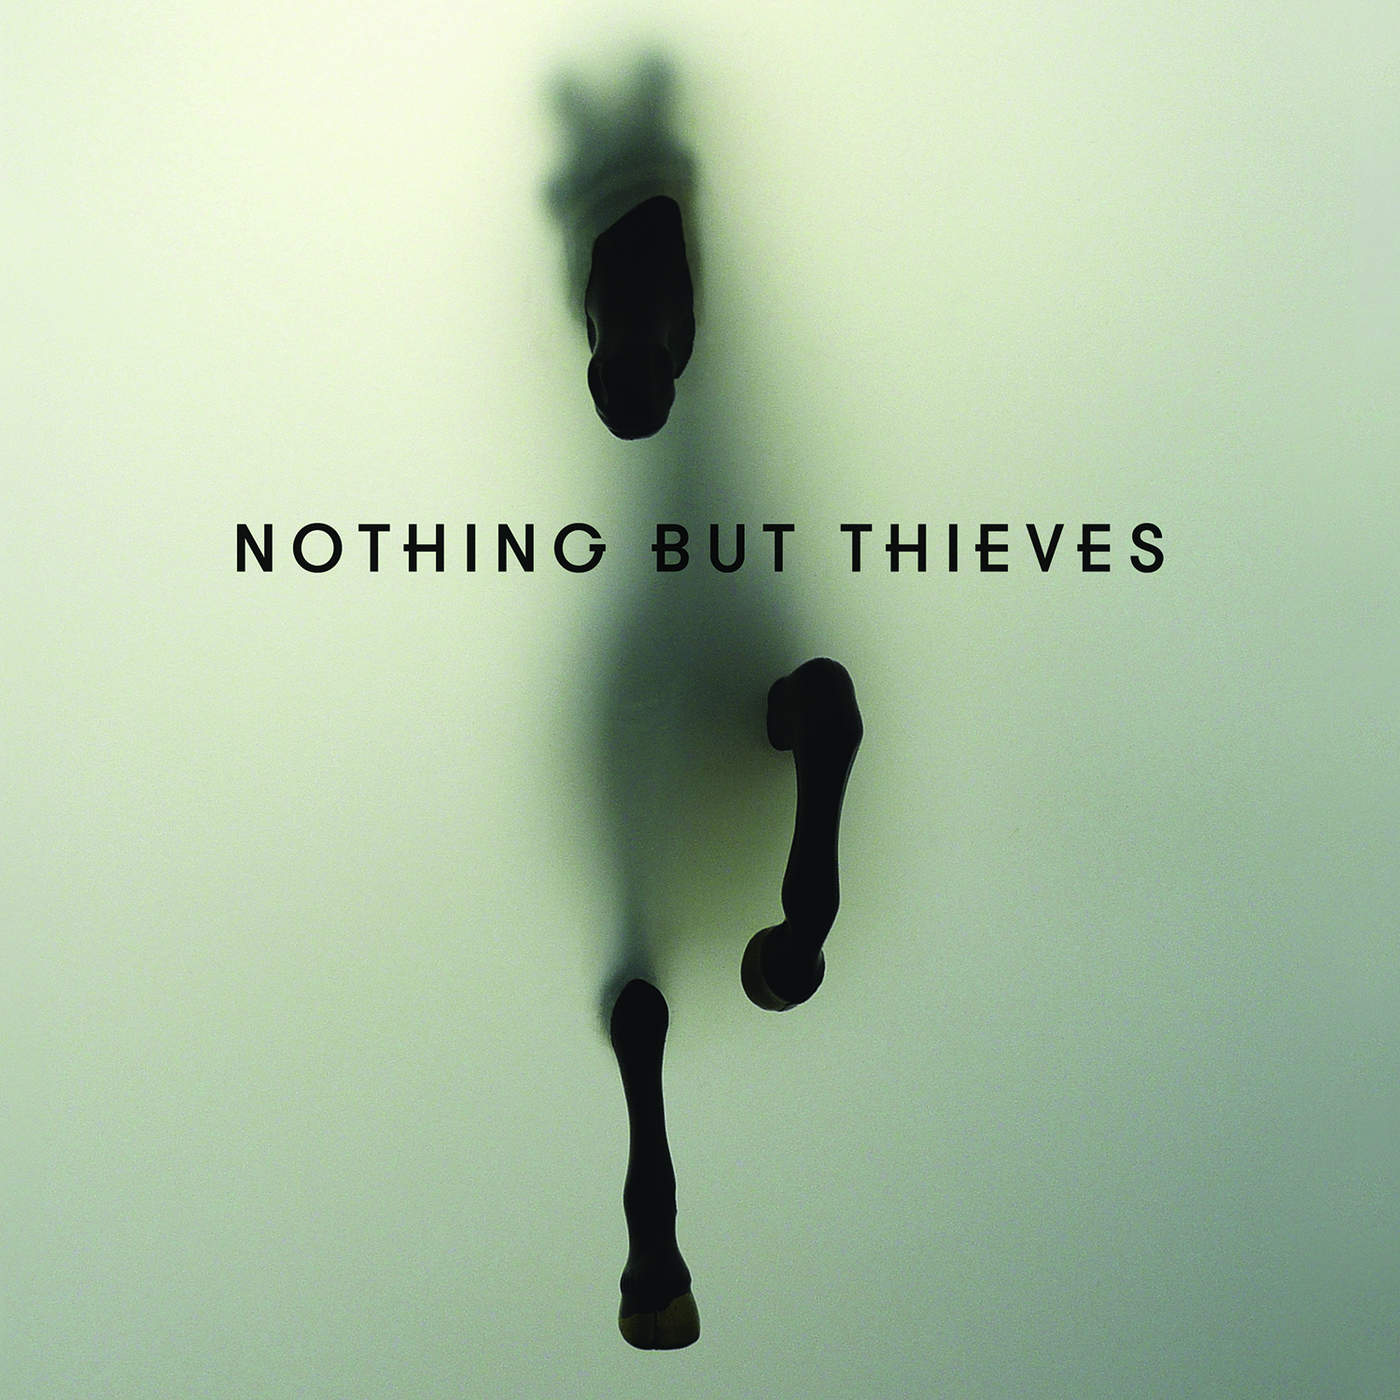 Nothing But Thieves - Nothing But Thieves (Deluxe Edition) (2015)